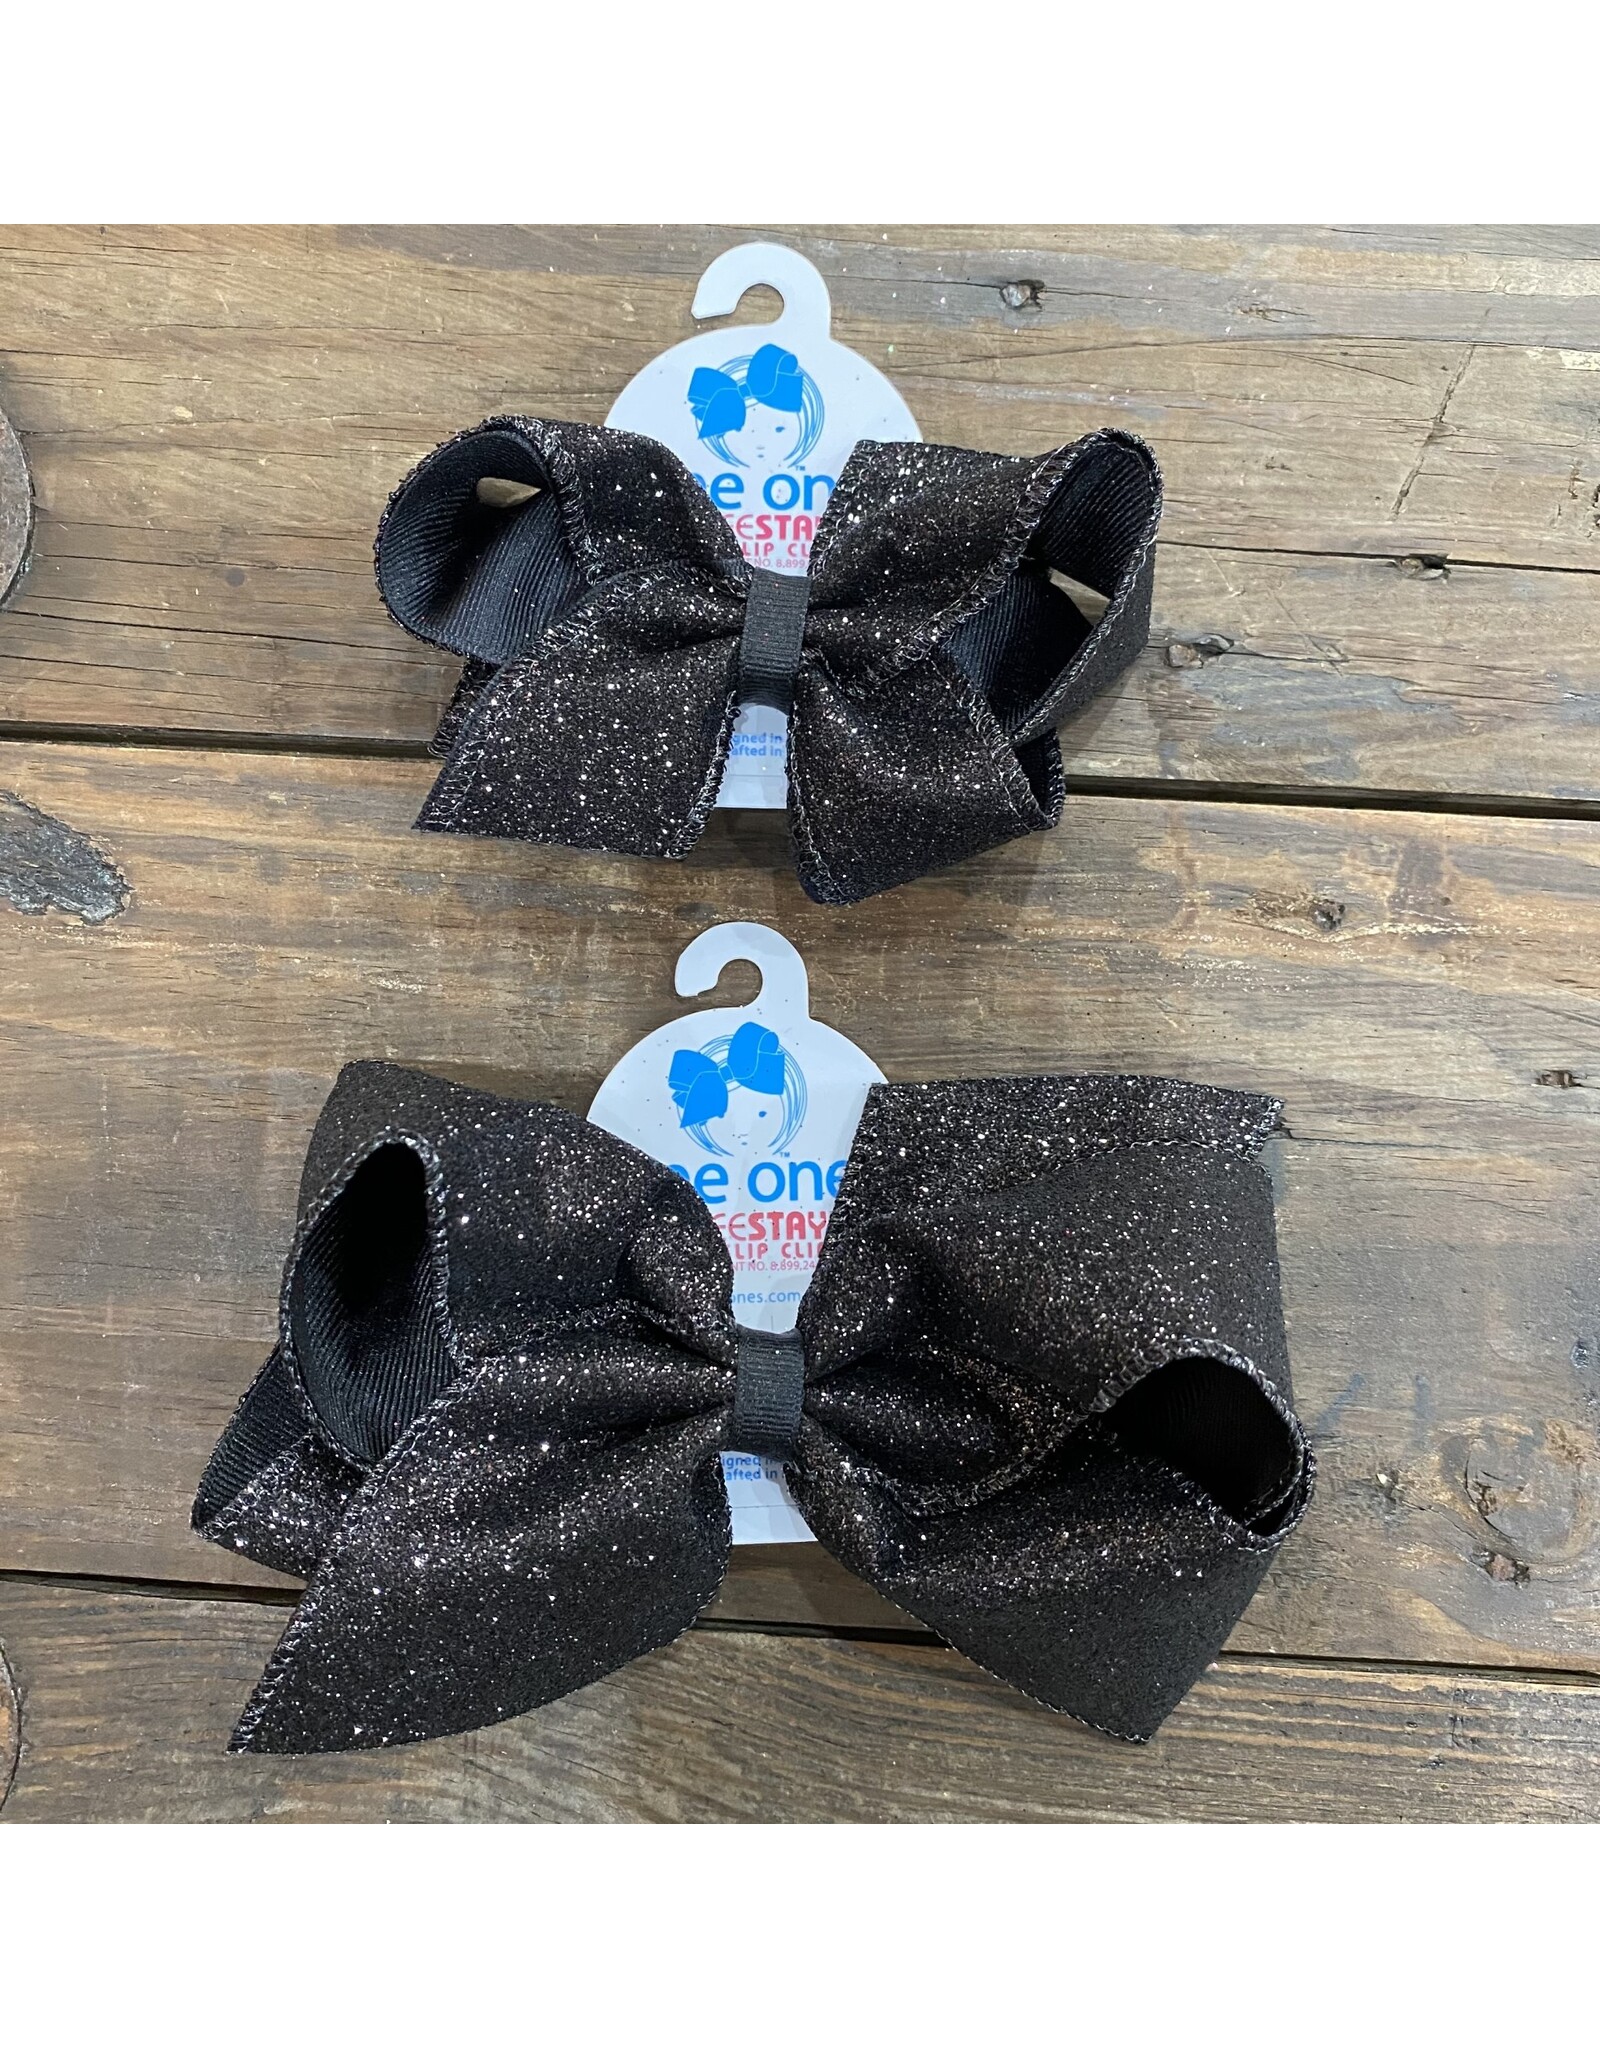 Wee Ones- Black Glitter Overlay Bow